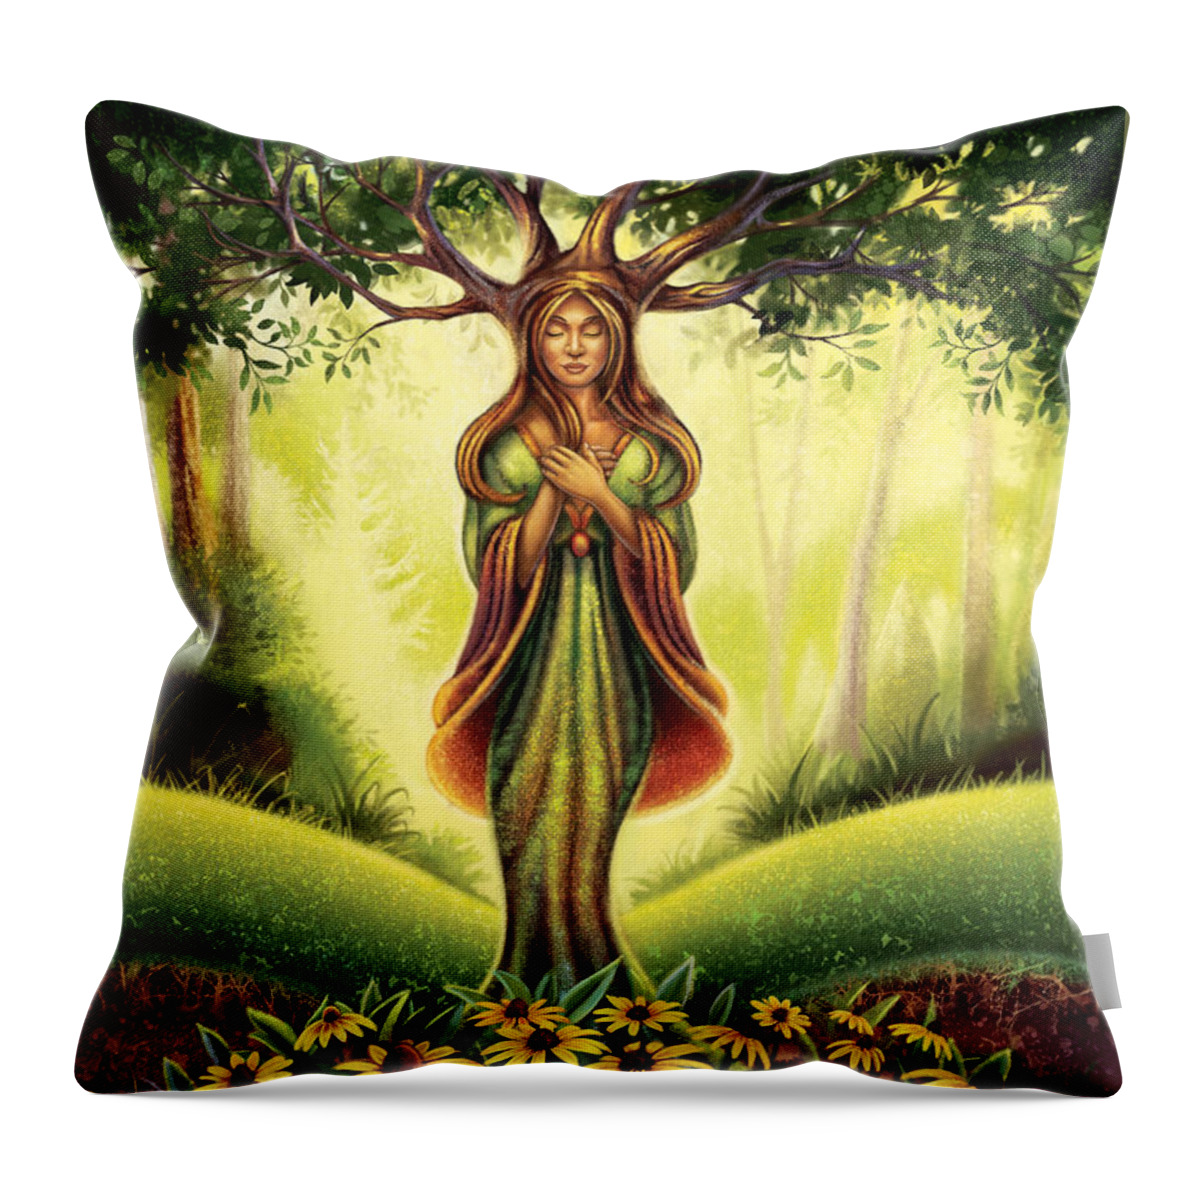 Black Eyed Susan Throw Pillow featuring the painting Get Grounded - Black Eyed Susan by Anne Wertheim